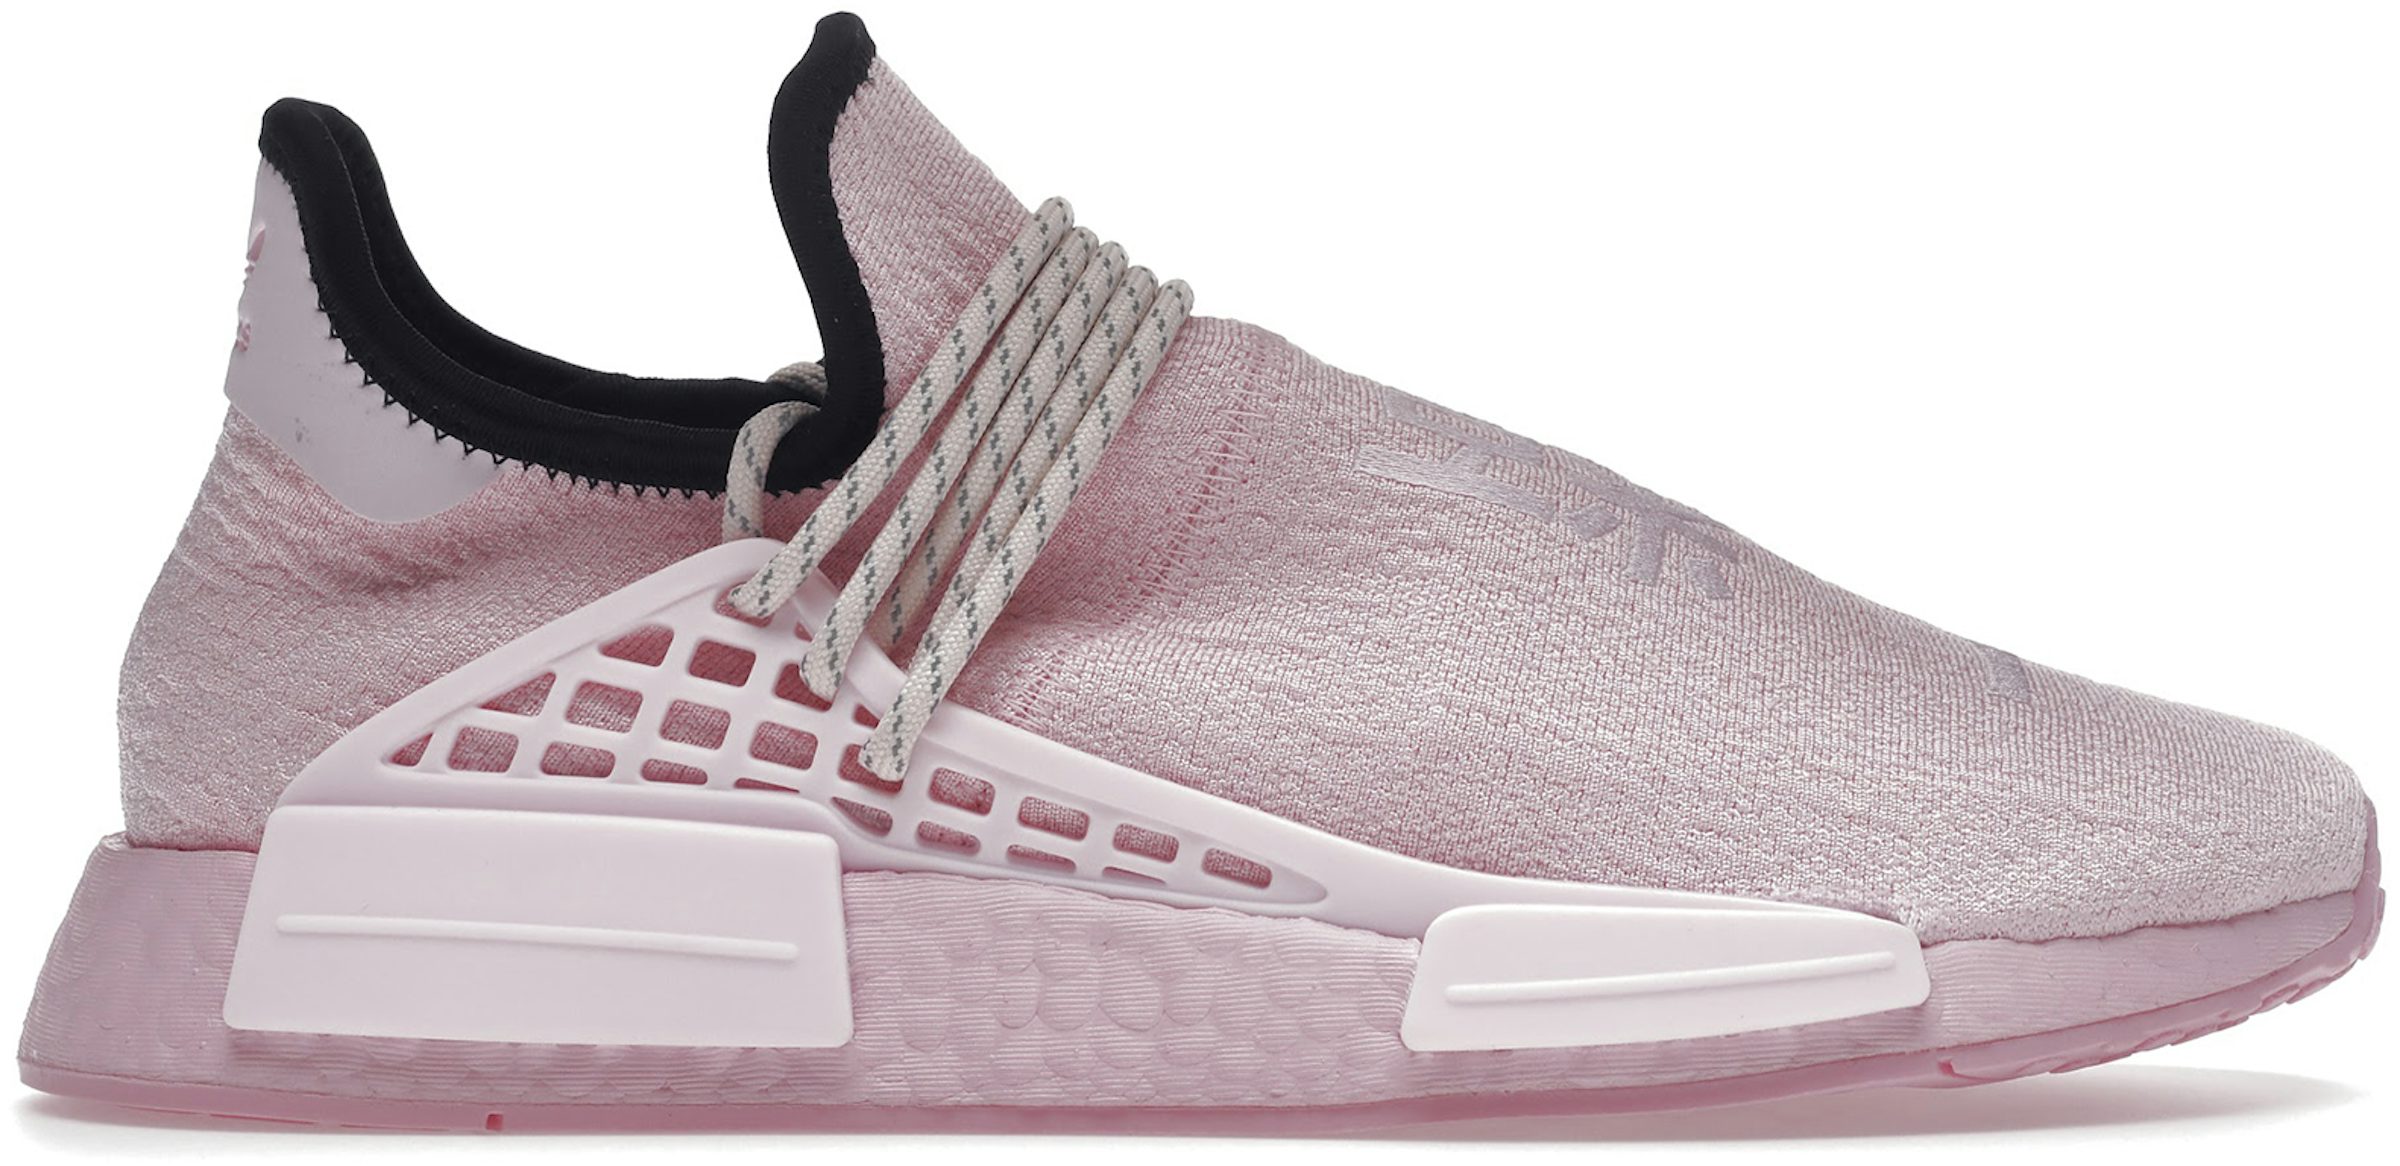 Pharrell Williams: Pharrell Williams x Adidas NMD S1 MAUBS shoes: Where  to buy, price, release date, and more details explored